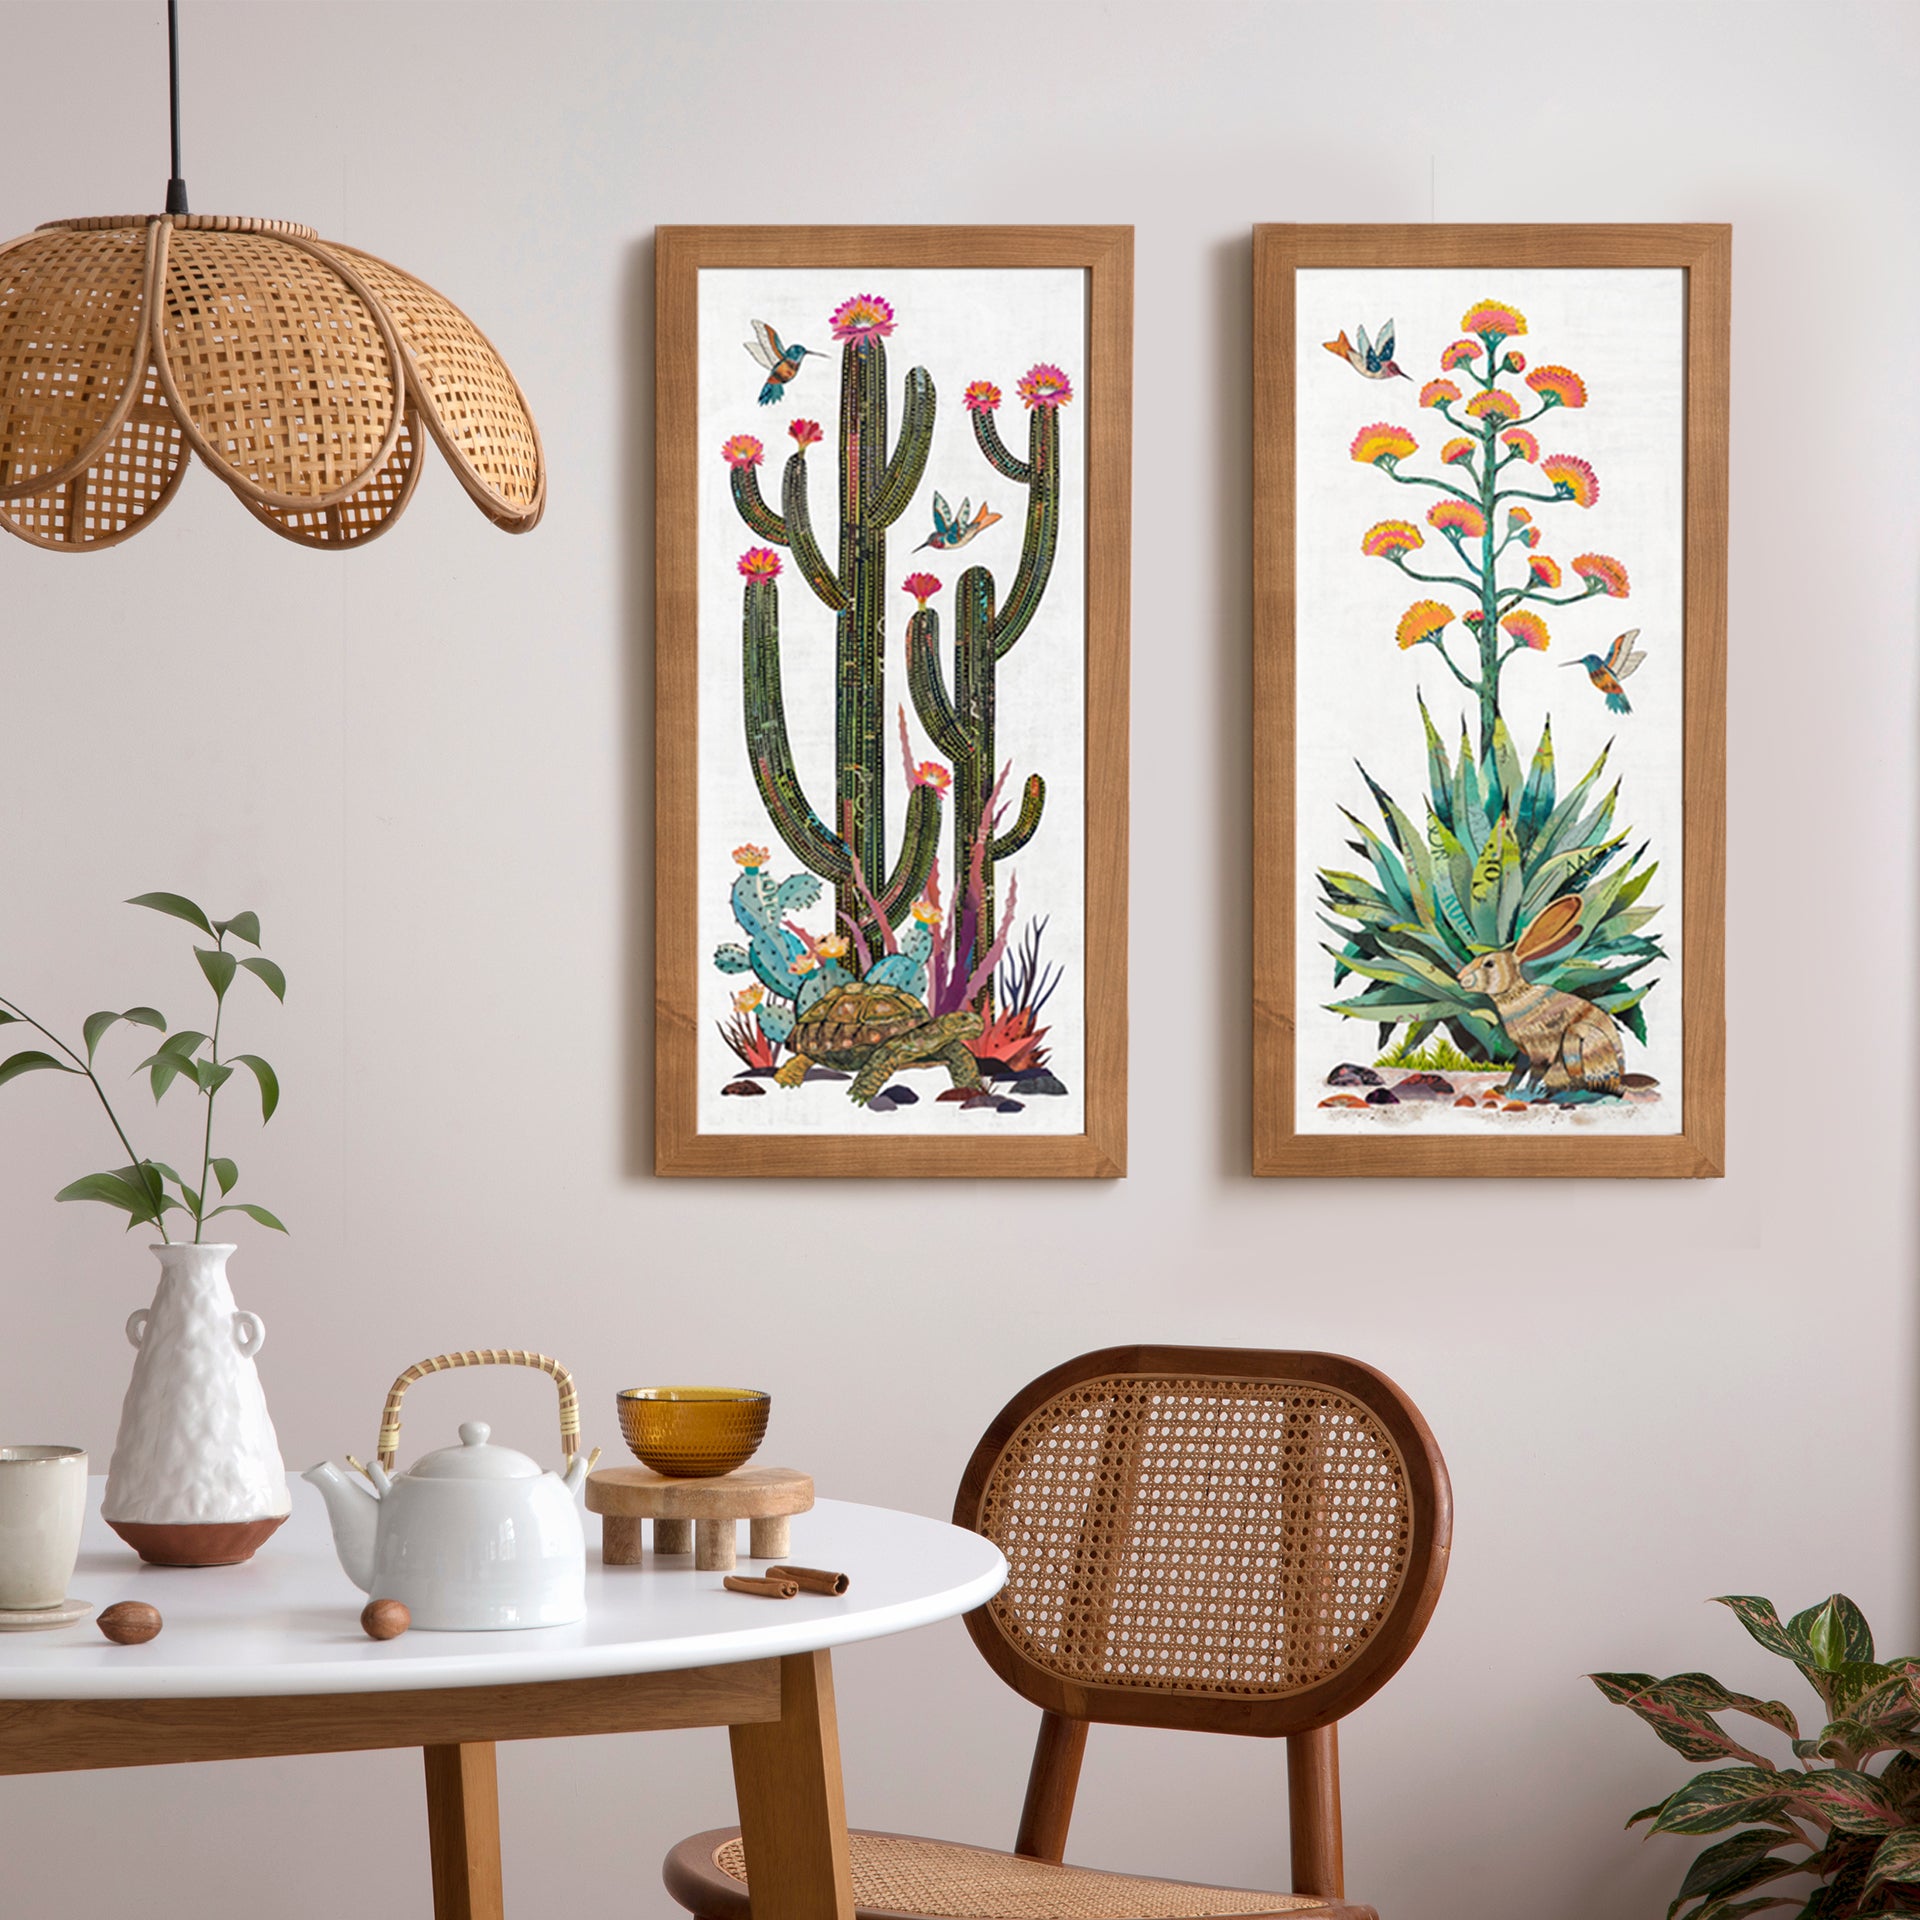 A captivating set of Southwestern collage art prints featuring elements of the desert landscape. -- cactus flora, a tortoise, and a jackrabbit -- each infused with the spirit of the Southwest. Modern desert art shown for the adobe home.